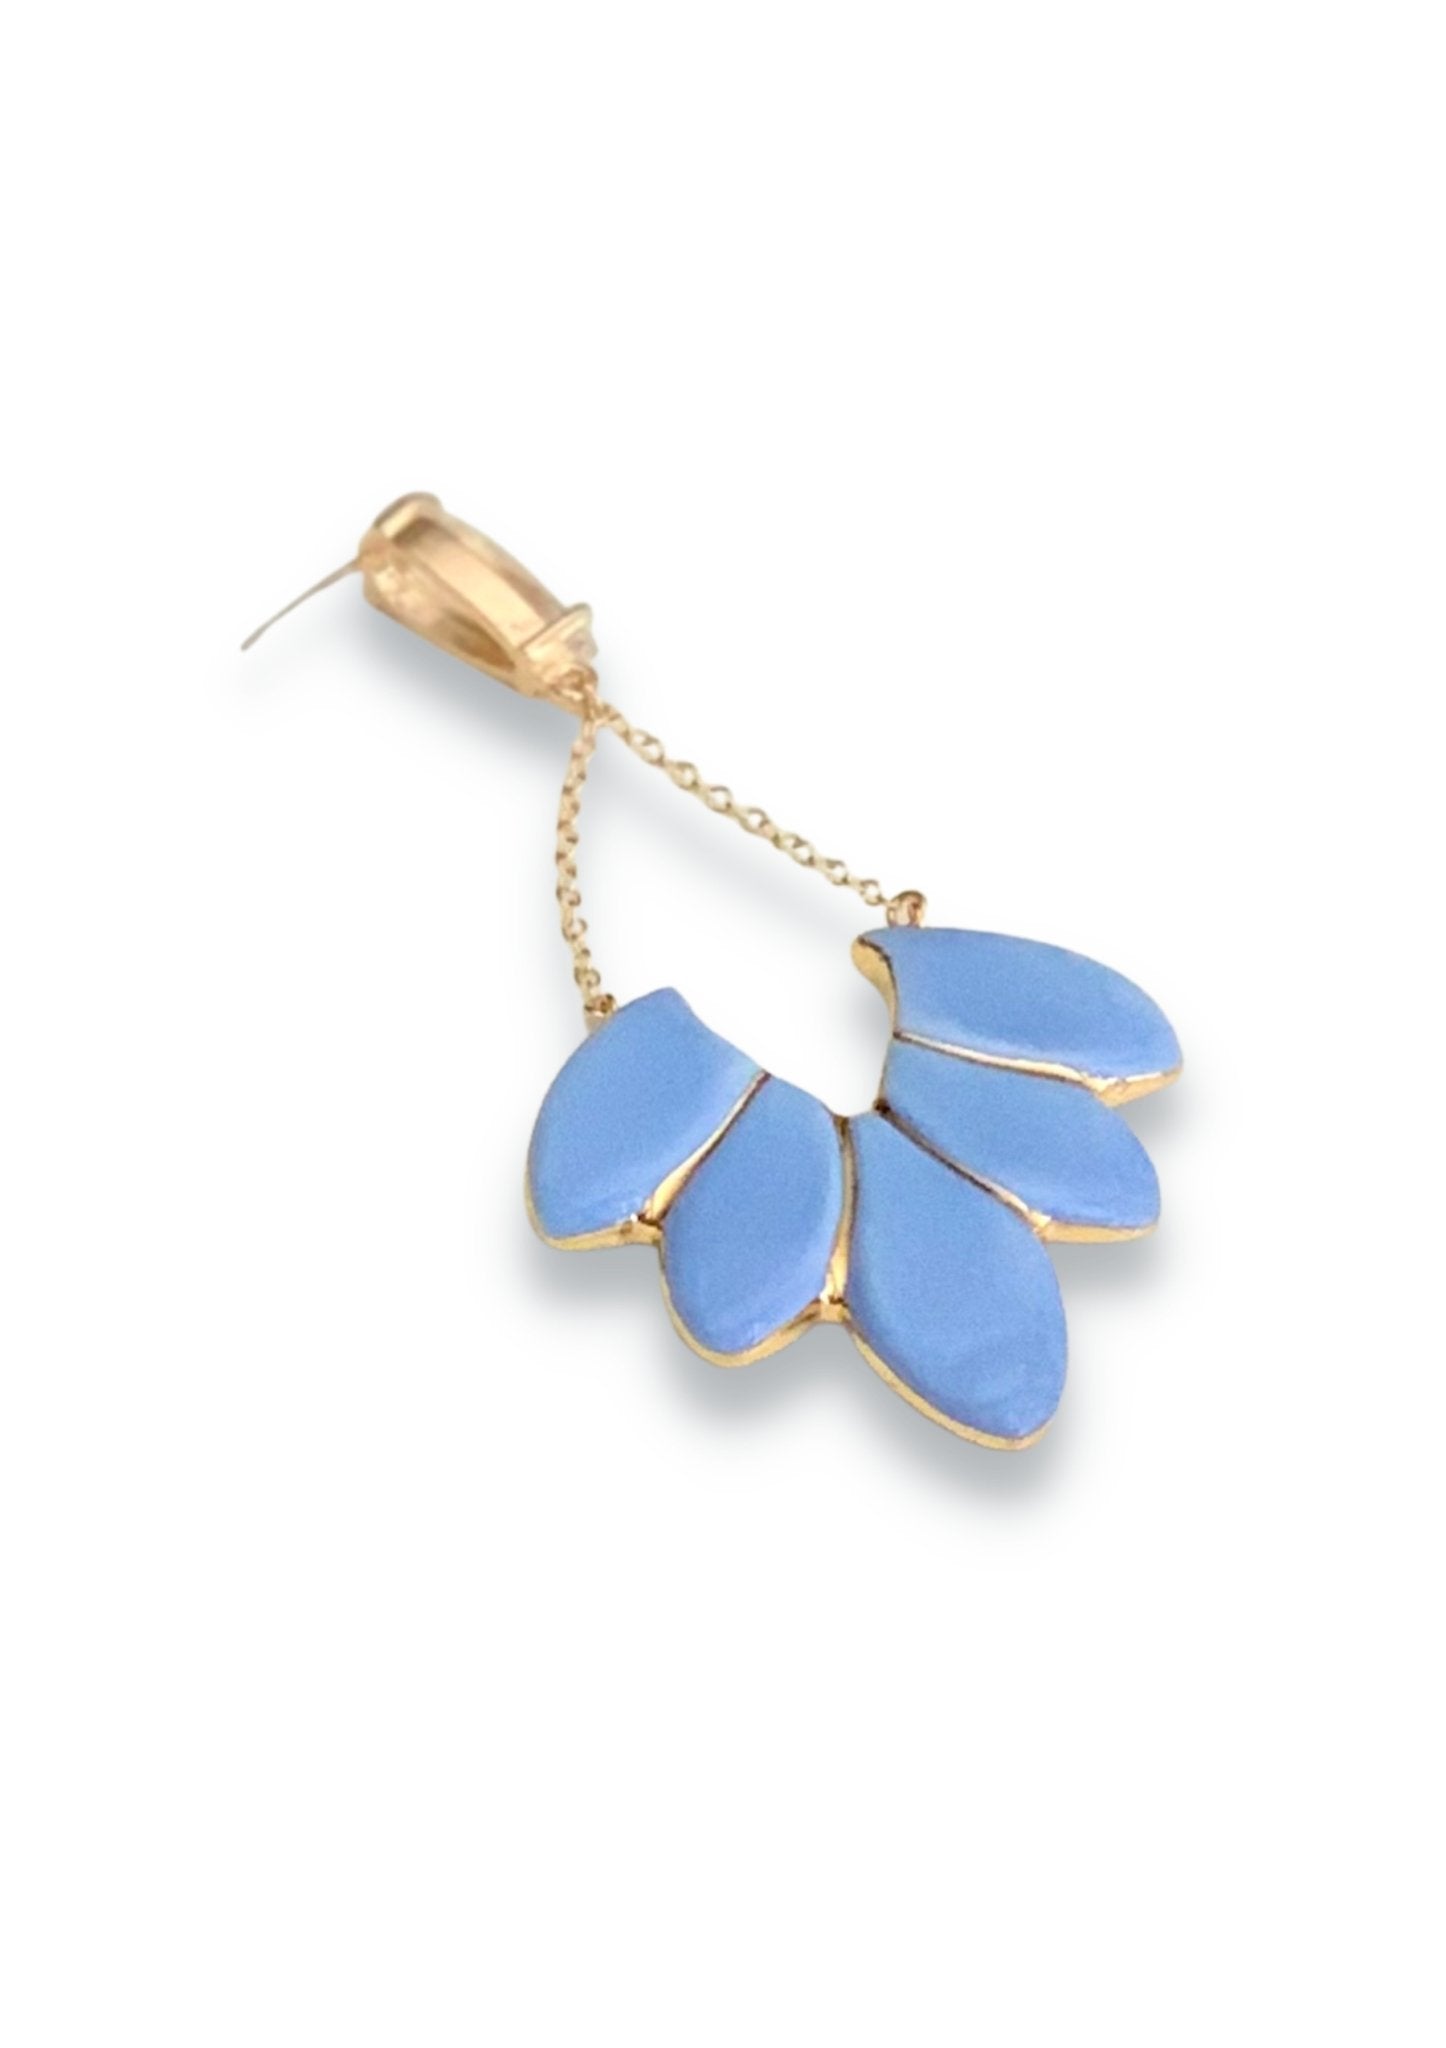 veuve-statement-earring-French-blue-susan-gordon-accessories-jewelry-earrings-georgia-kate